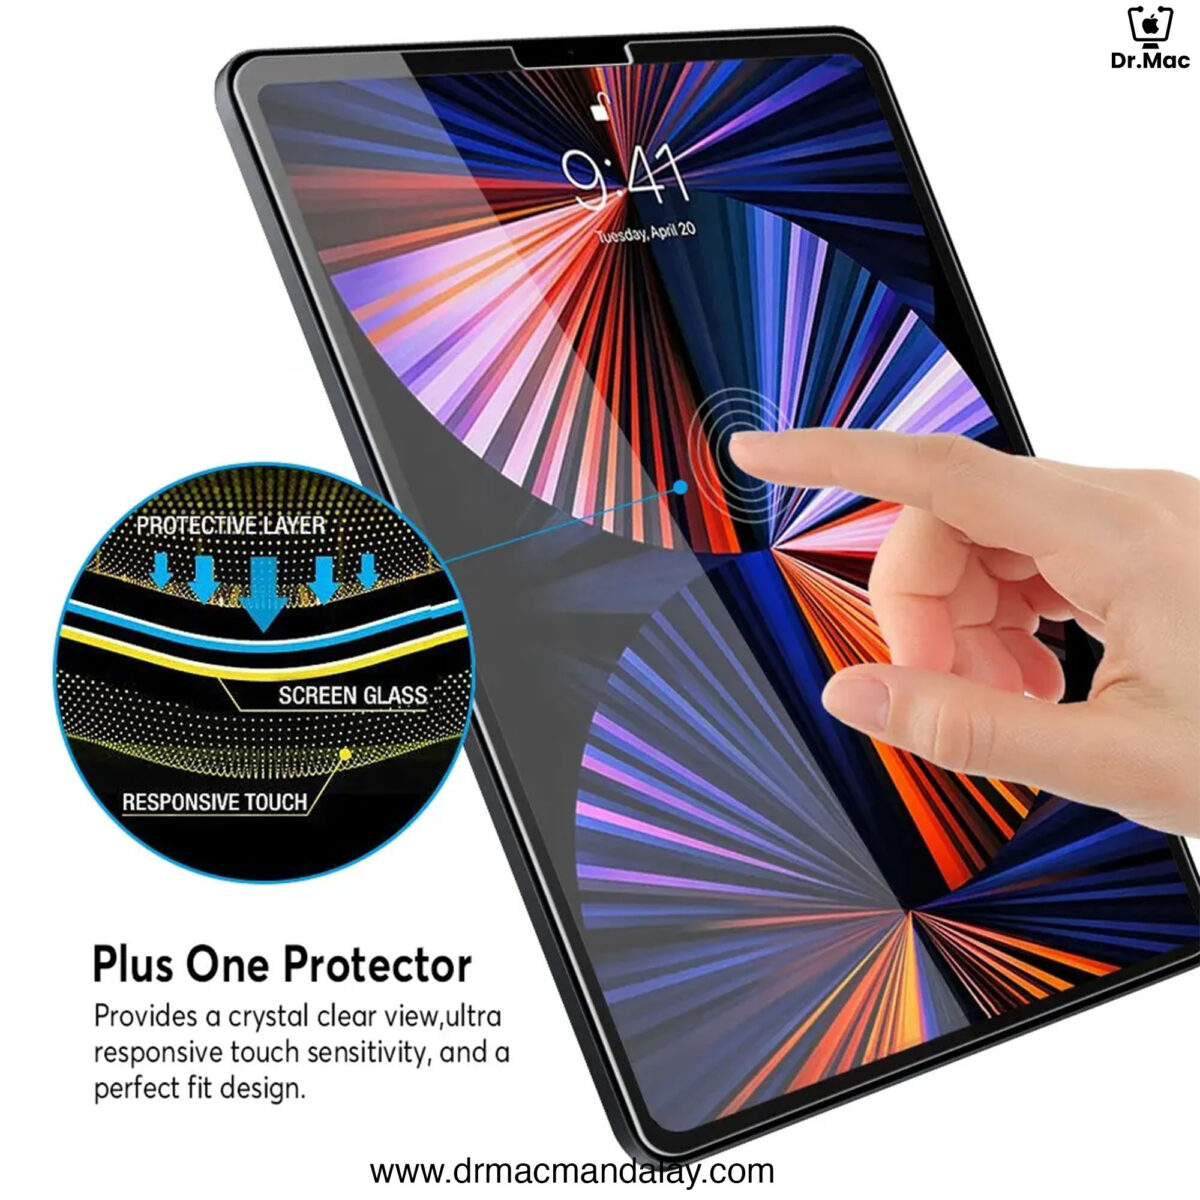 Screen Protector for iPad Pro 11" (1st,2nd,3rd,4th) and iPad Air 4,5